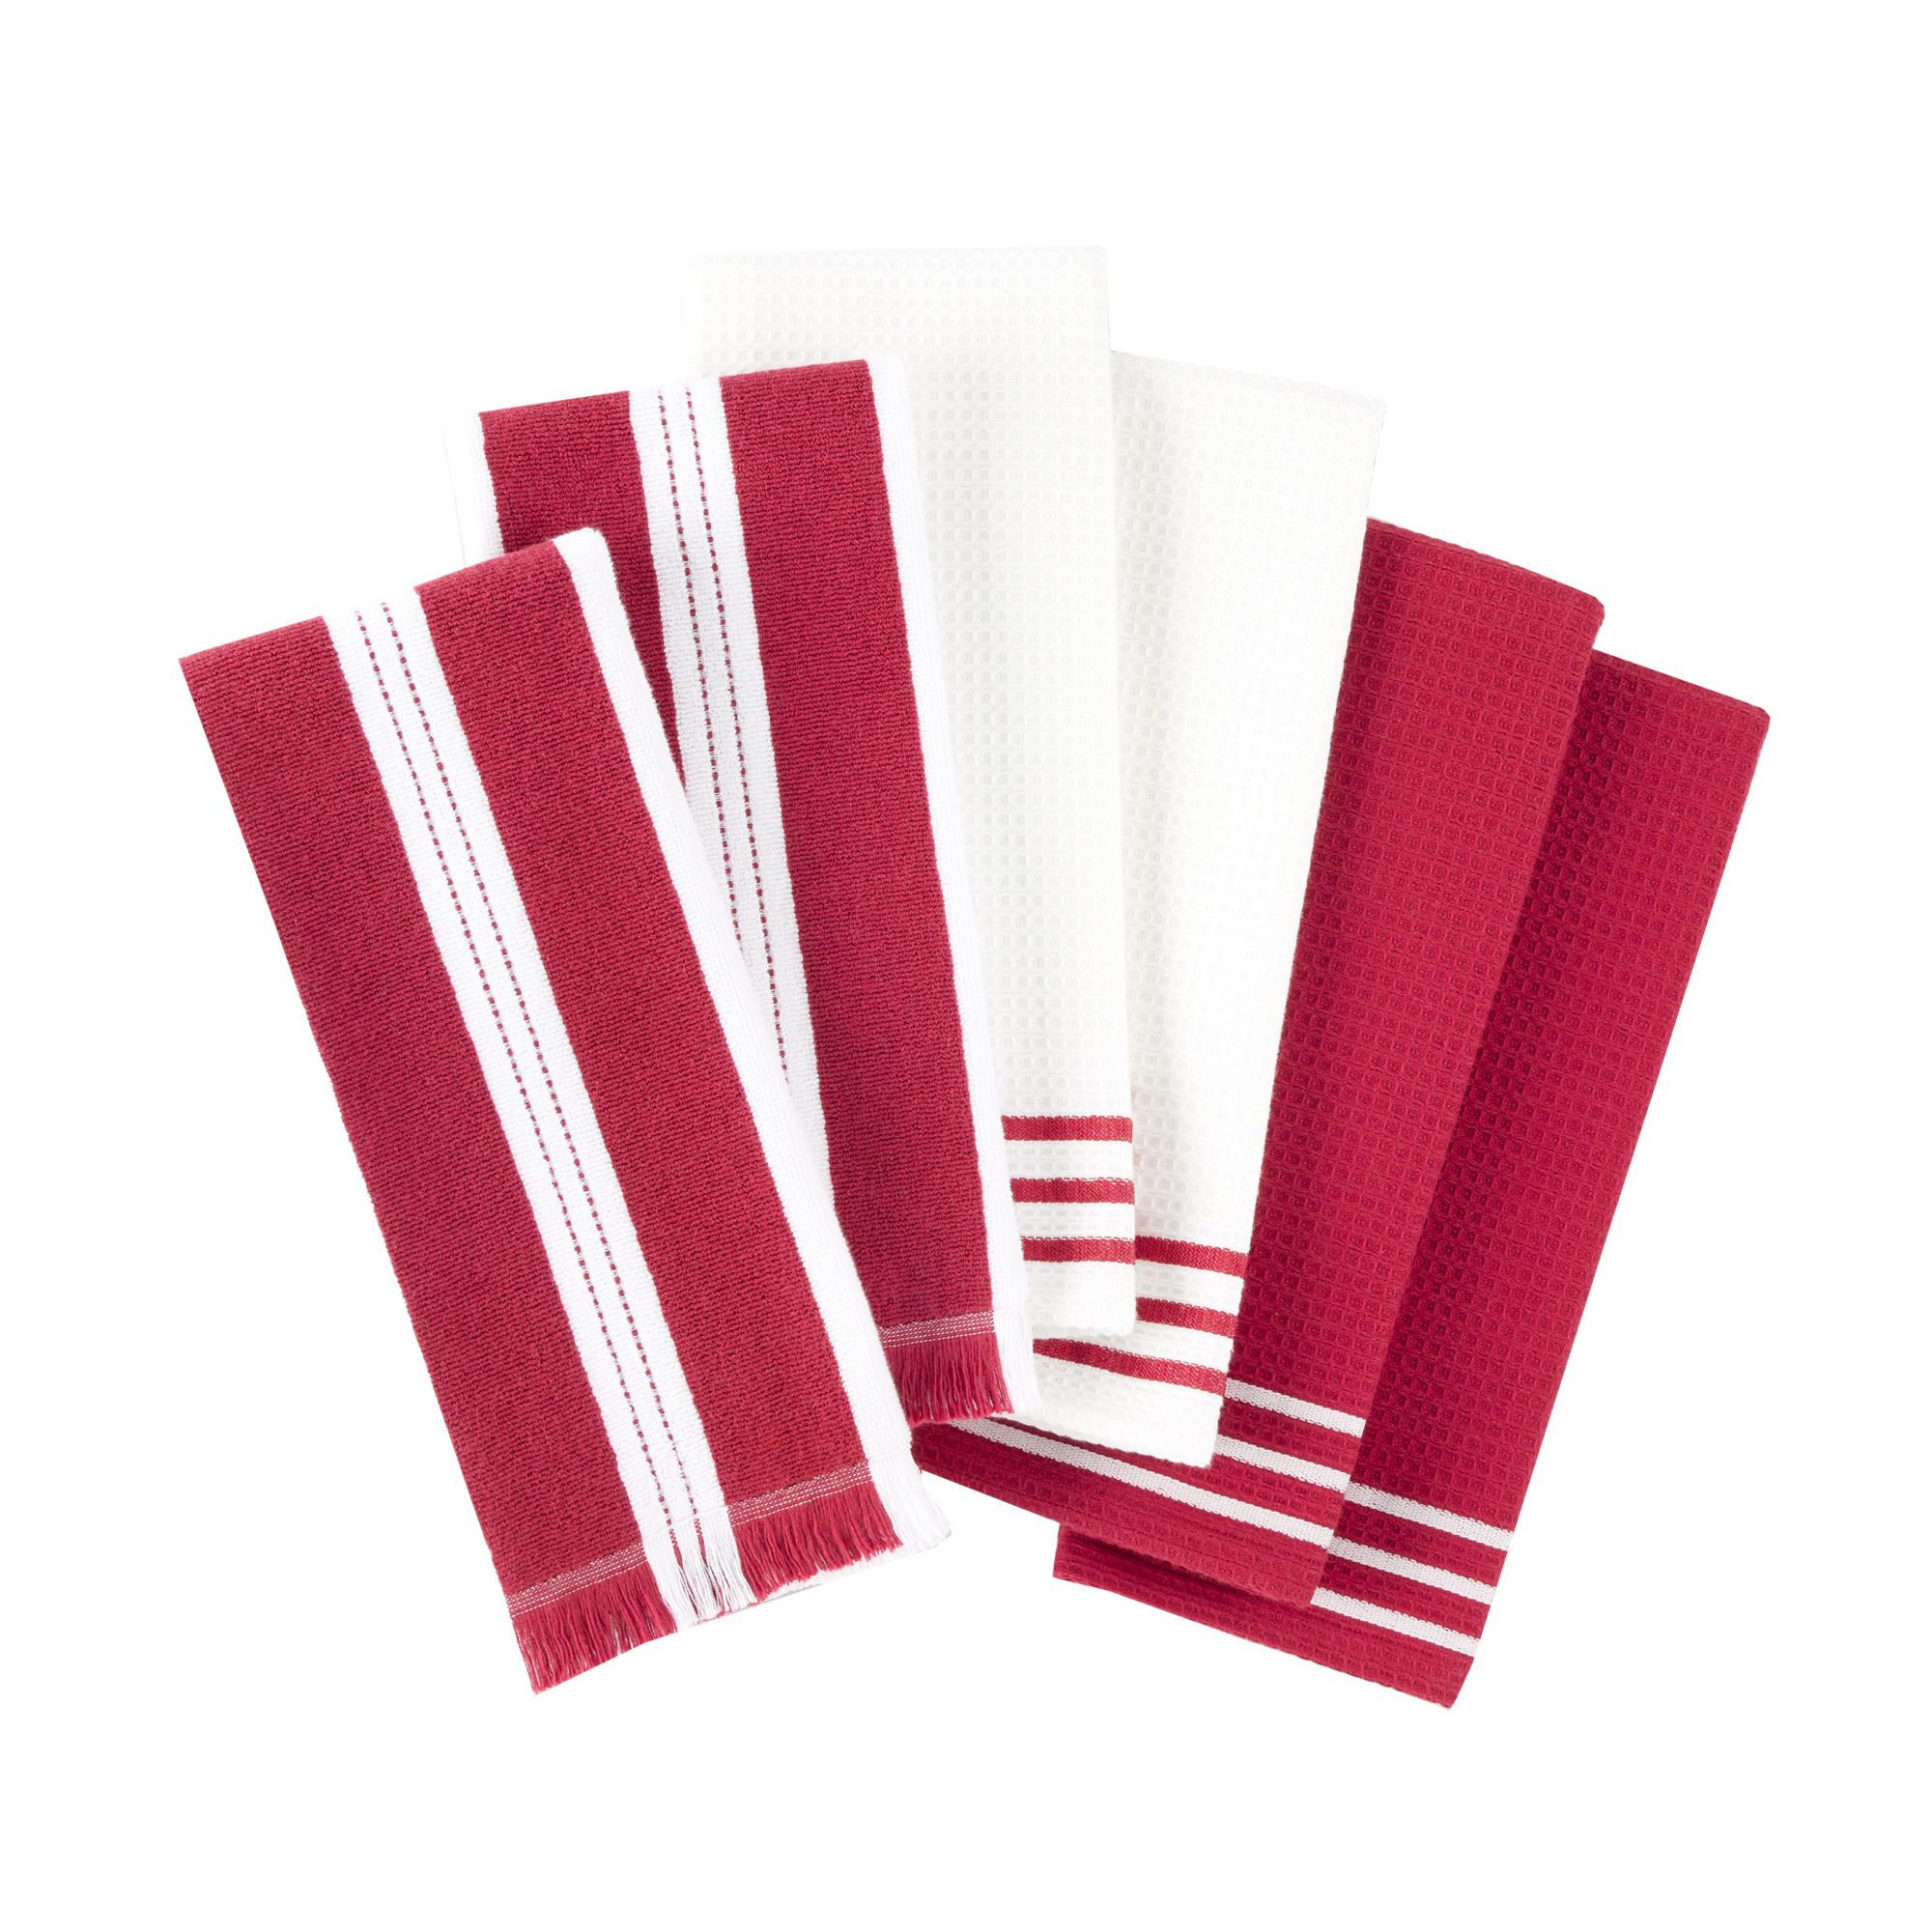 Sur La Table17 x 28 Waffle Holiday Striped Kitchen Towels, 6 pk. -  Red/White